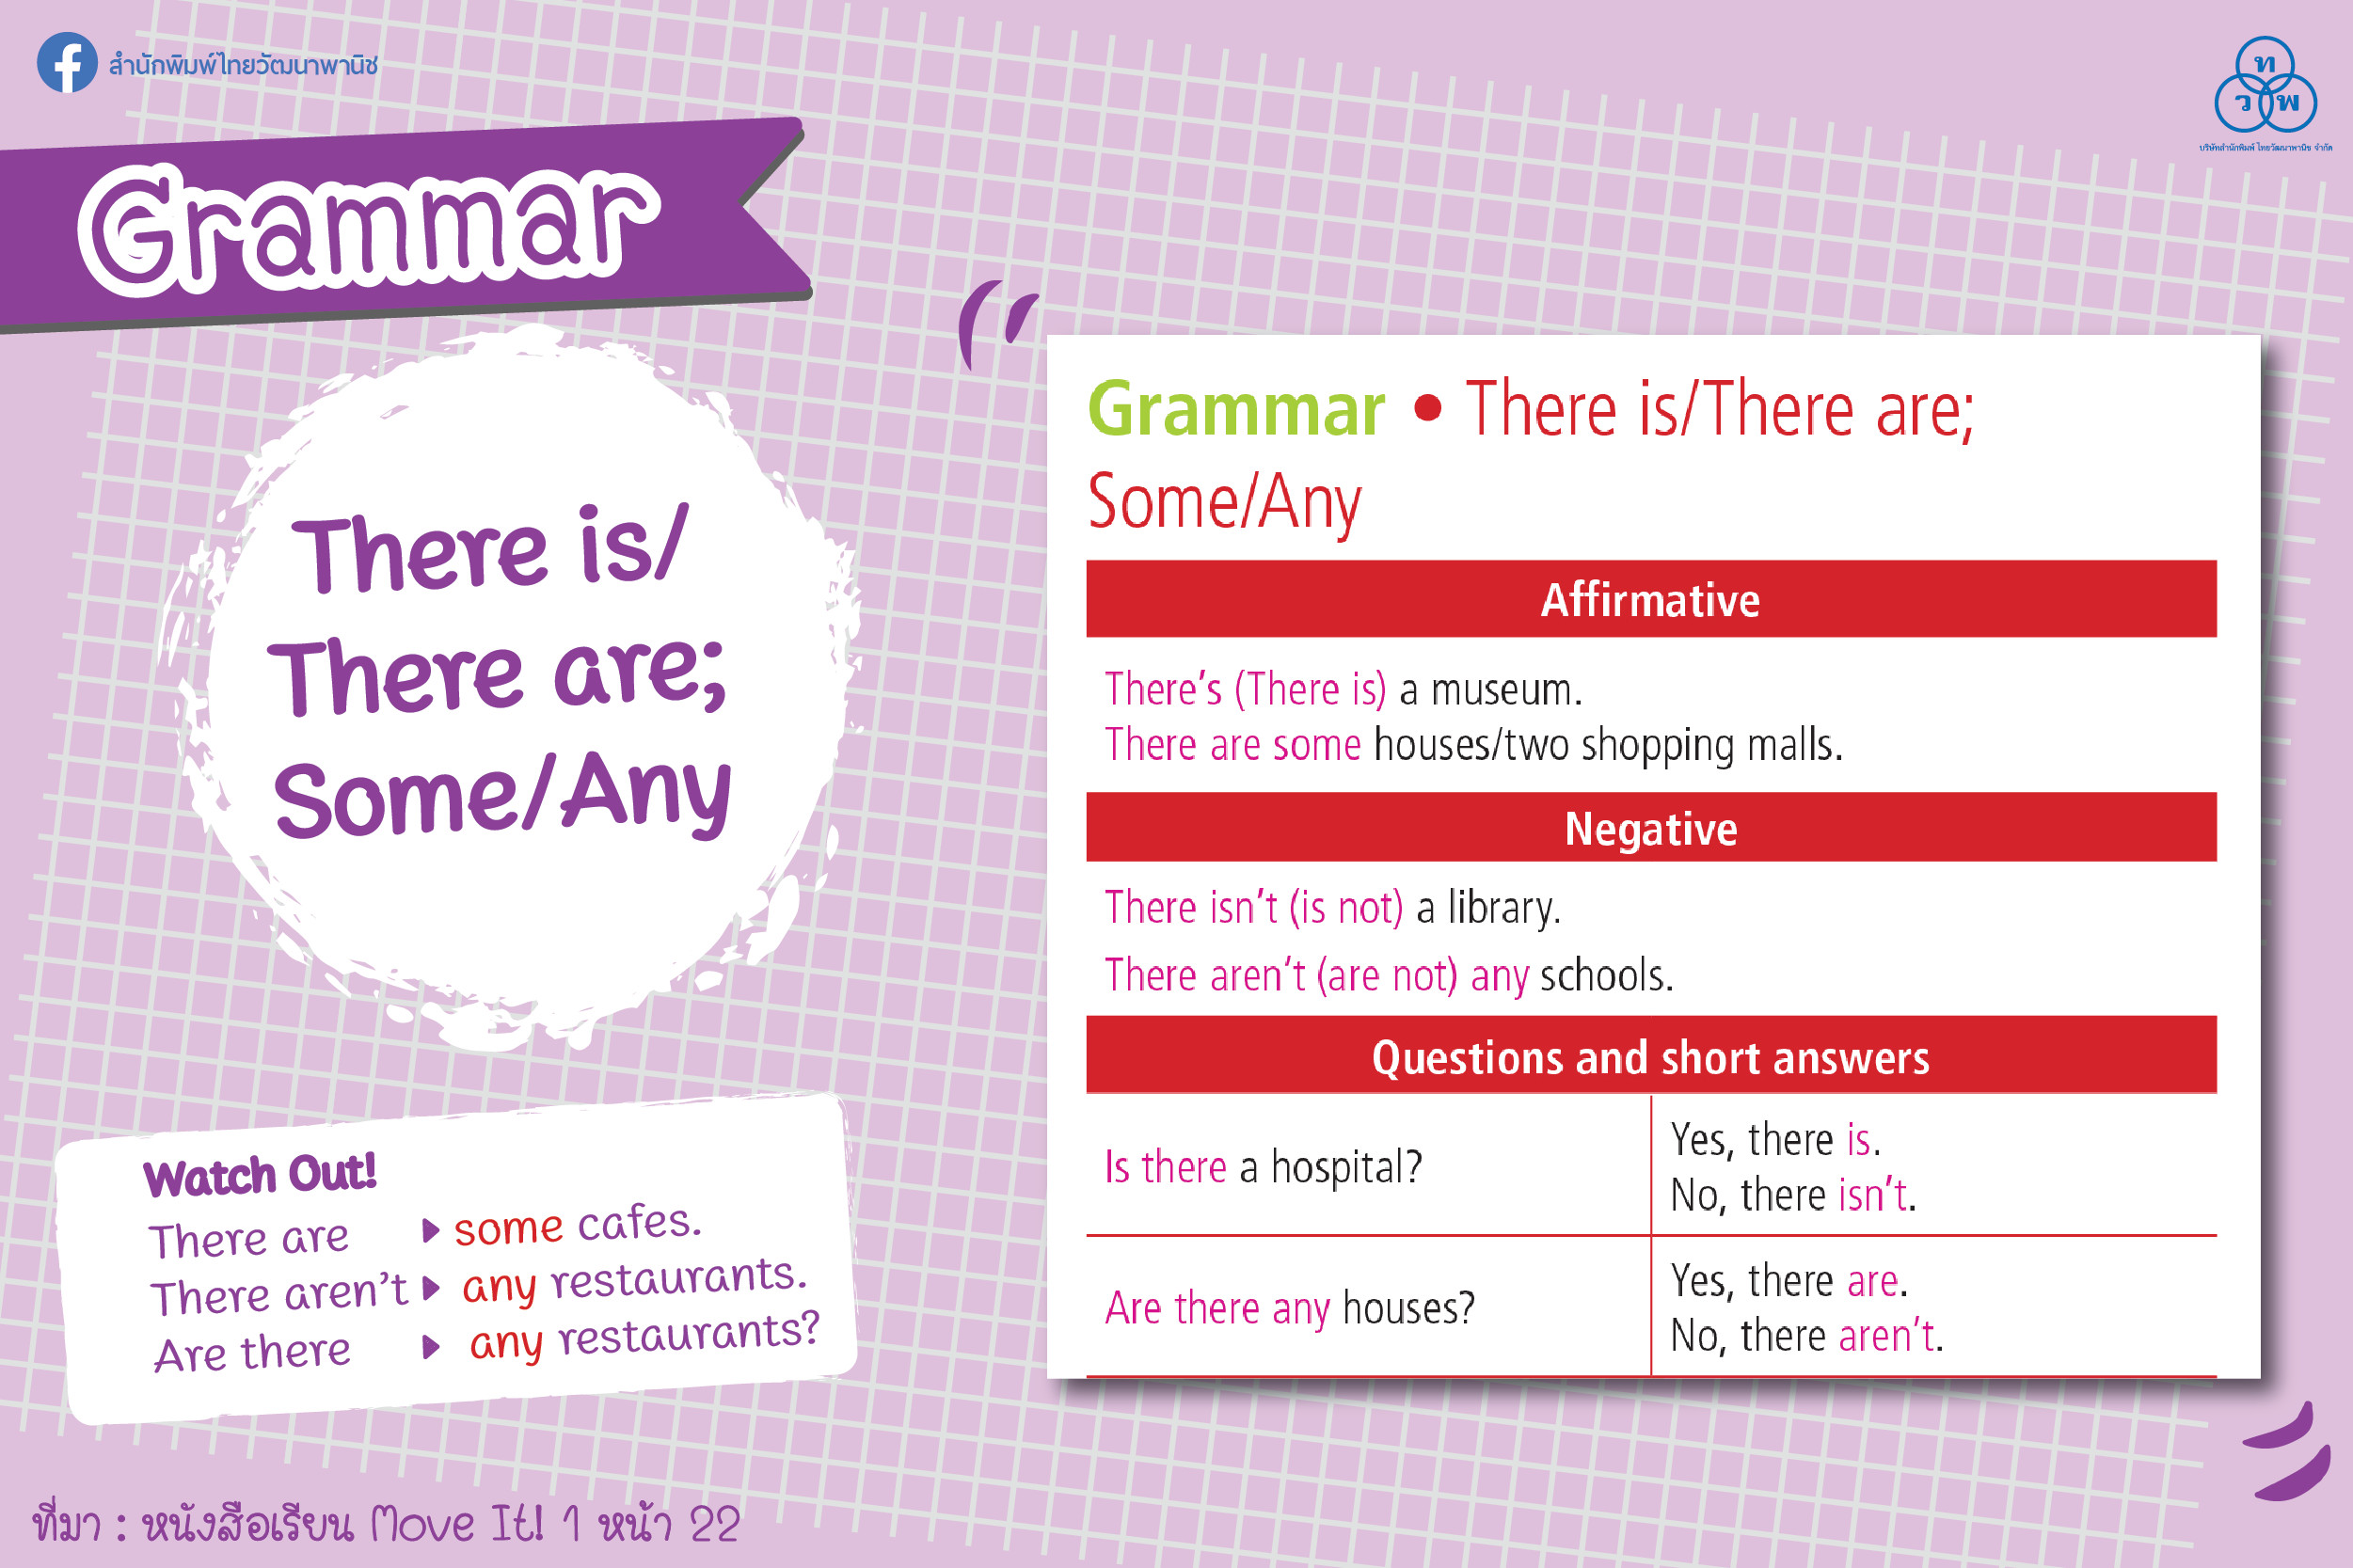 Grammar: There is/There are: Some/Any